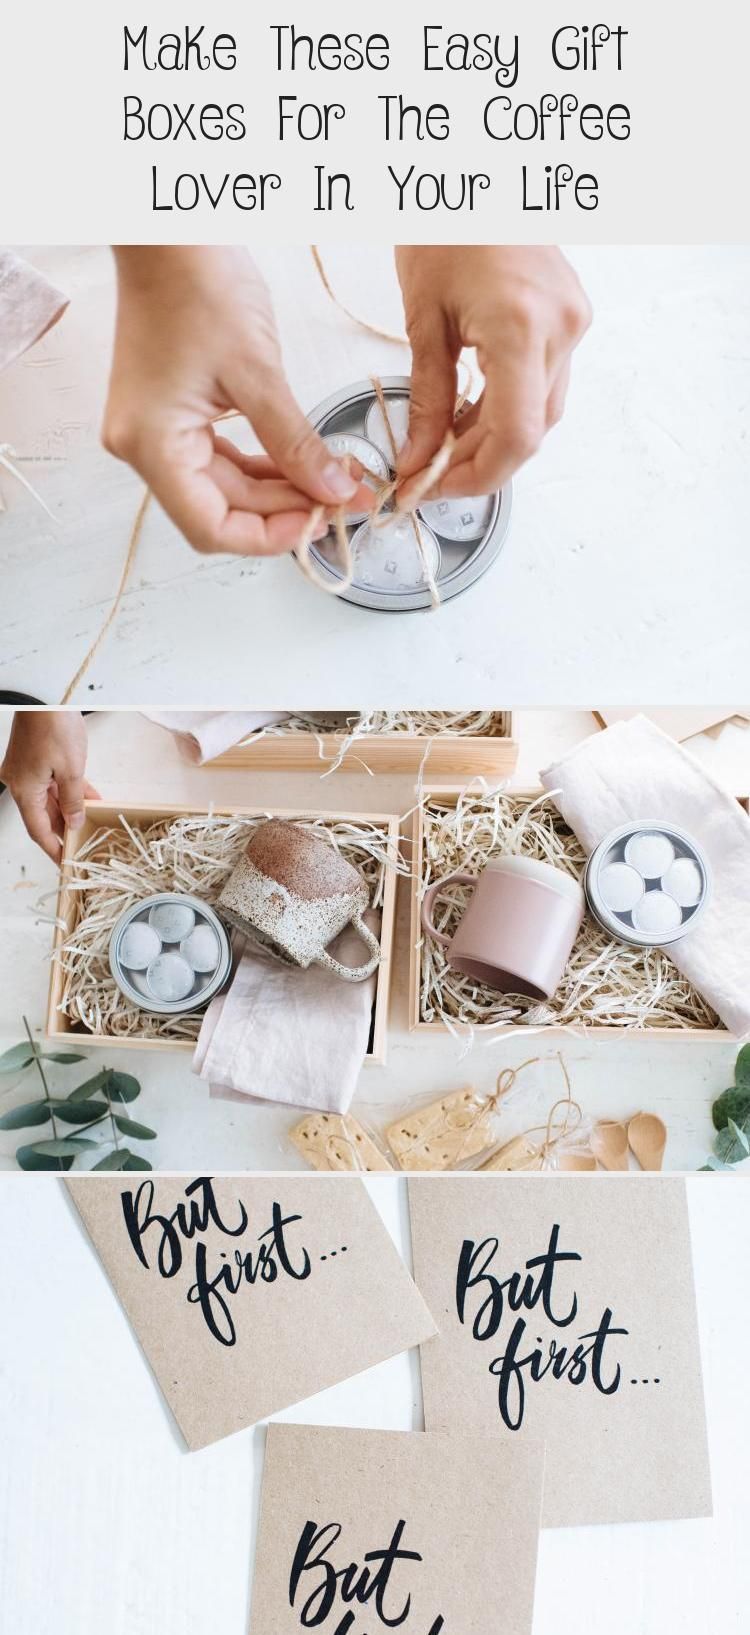 17 diy projects For Couples friends ideas